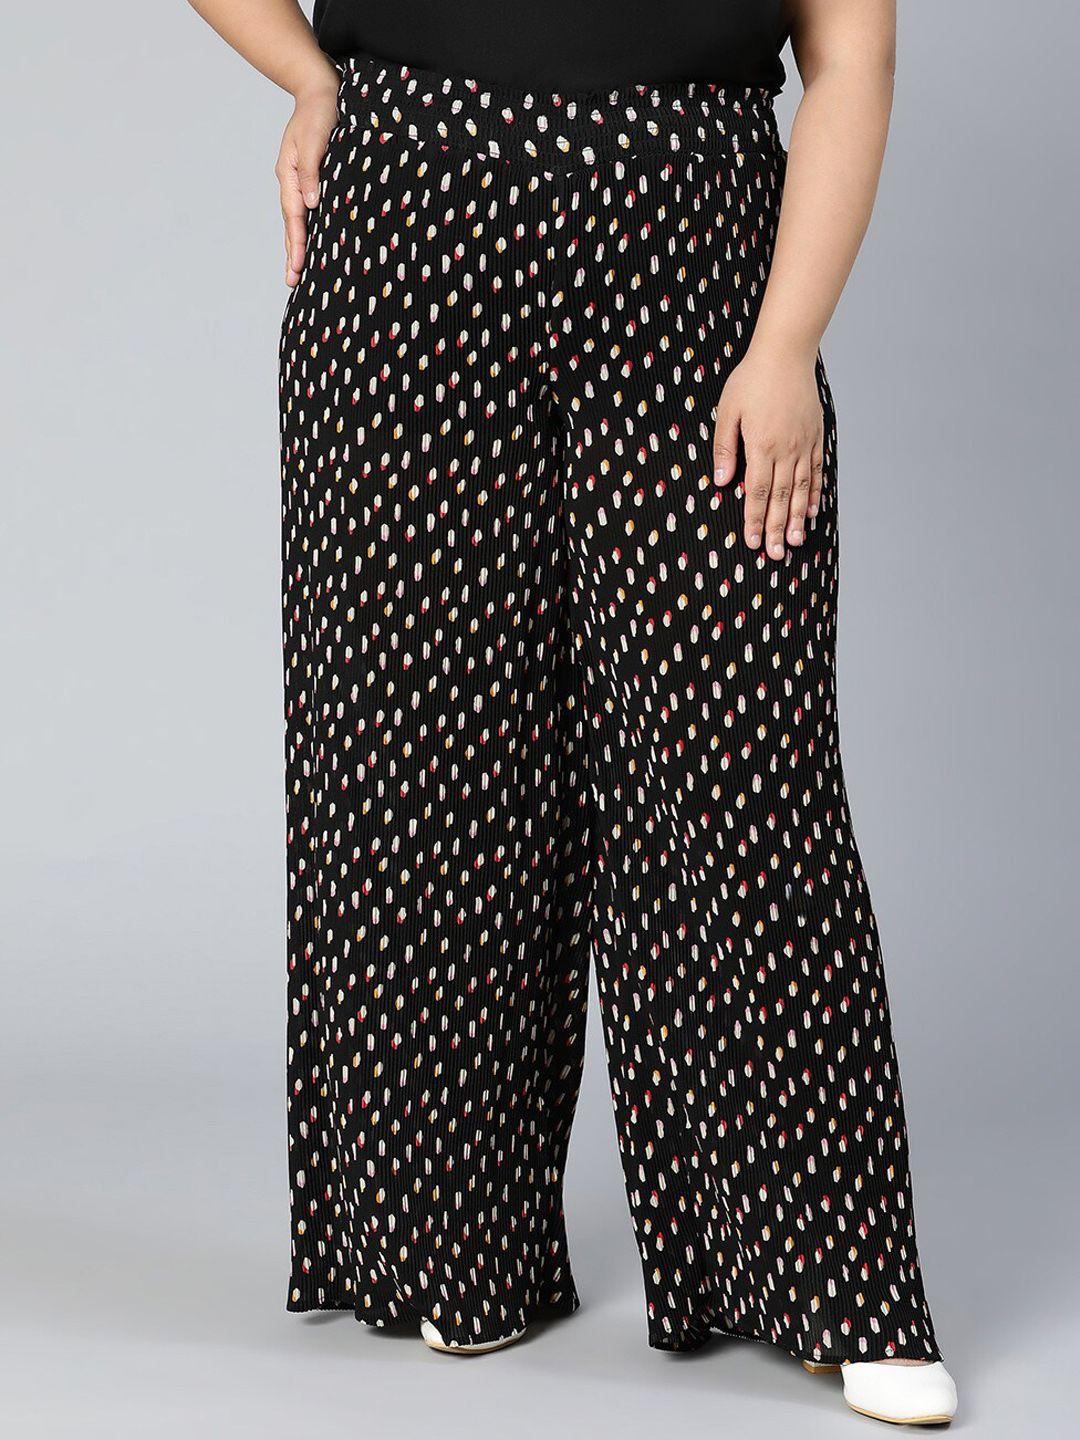 oxolloxo women black printed trousers